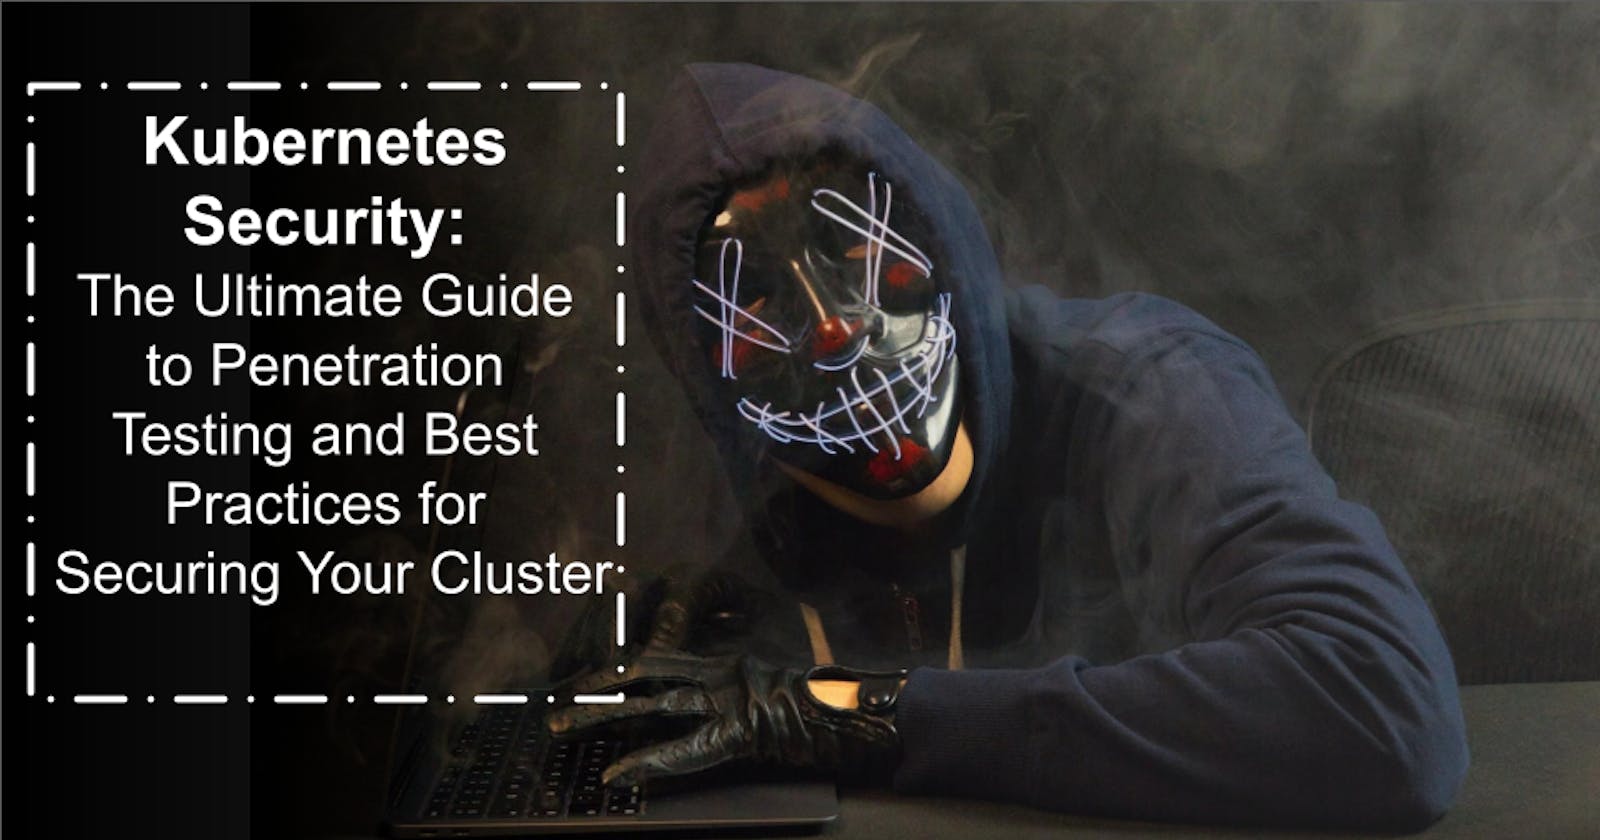 Kubernetes Security: The Ultimate Guide to Penetration Testing and Best Practices for Securing Your Cluster